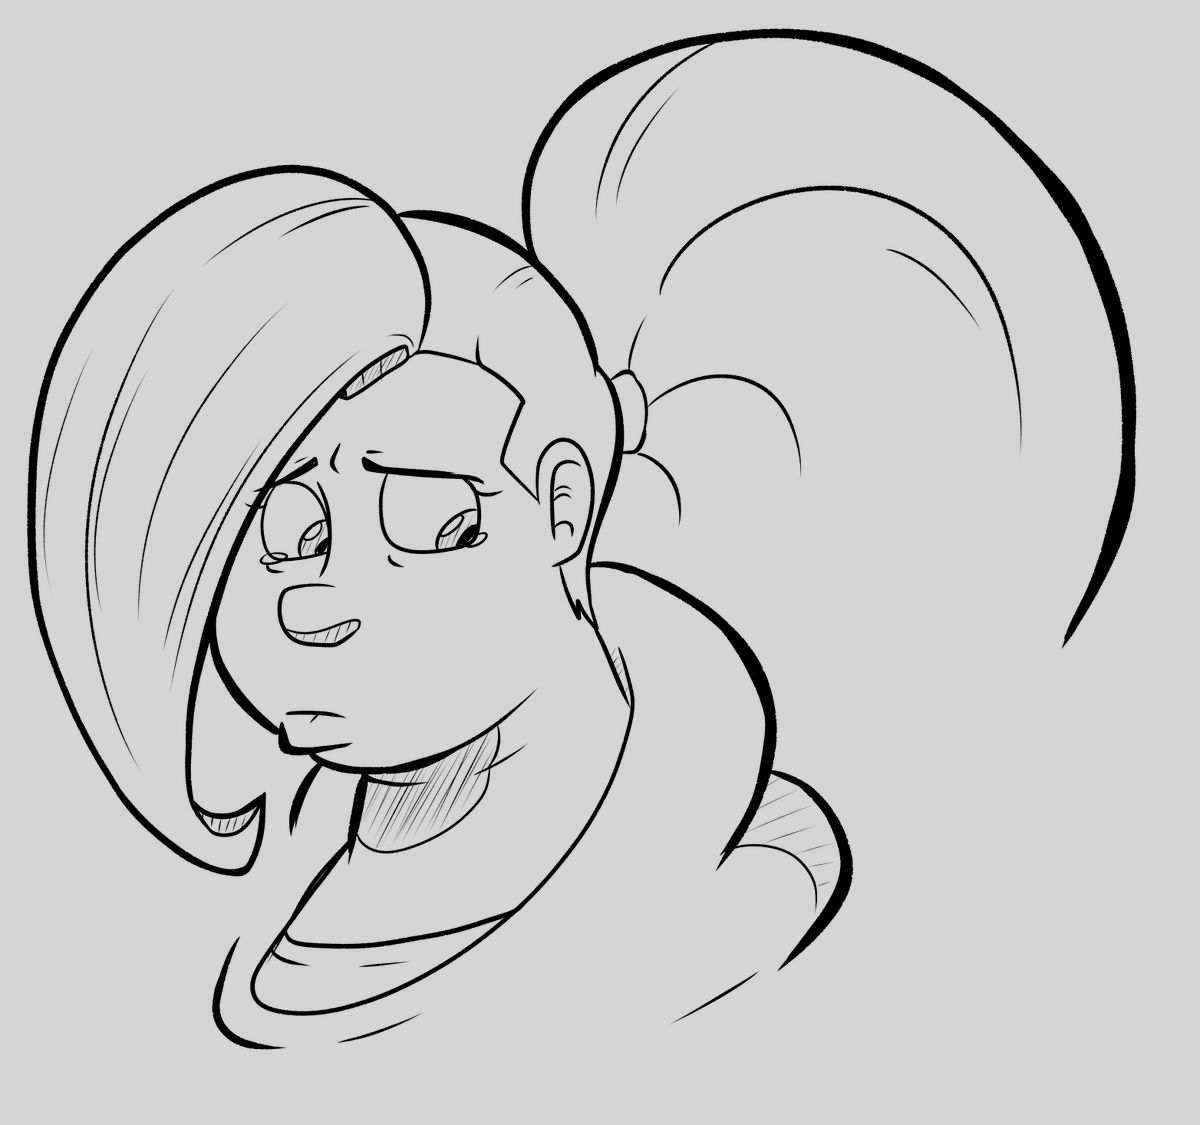 Been feeling really depressed lately, and more and more unfulfilled as a creator. Connie's been a big outlet for my self-expression, so here's Connie feeling how I feel right now.